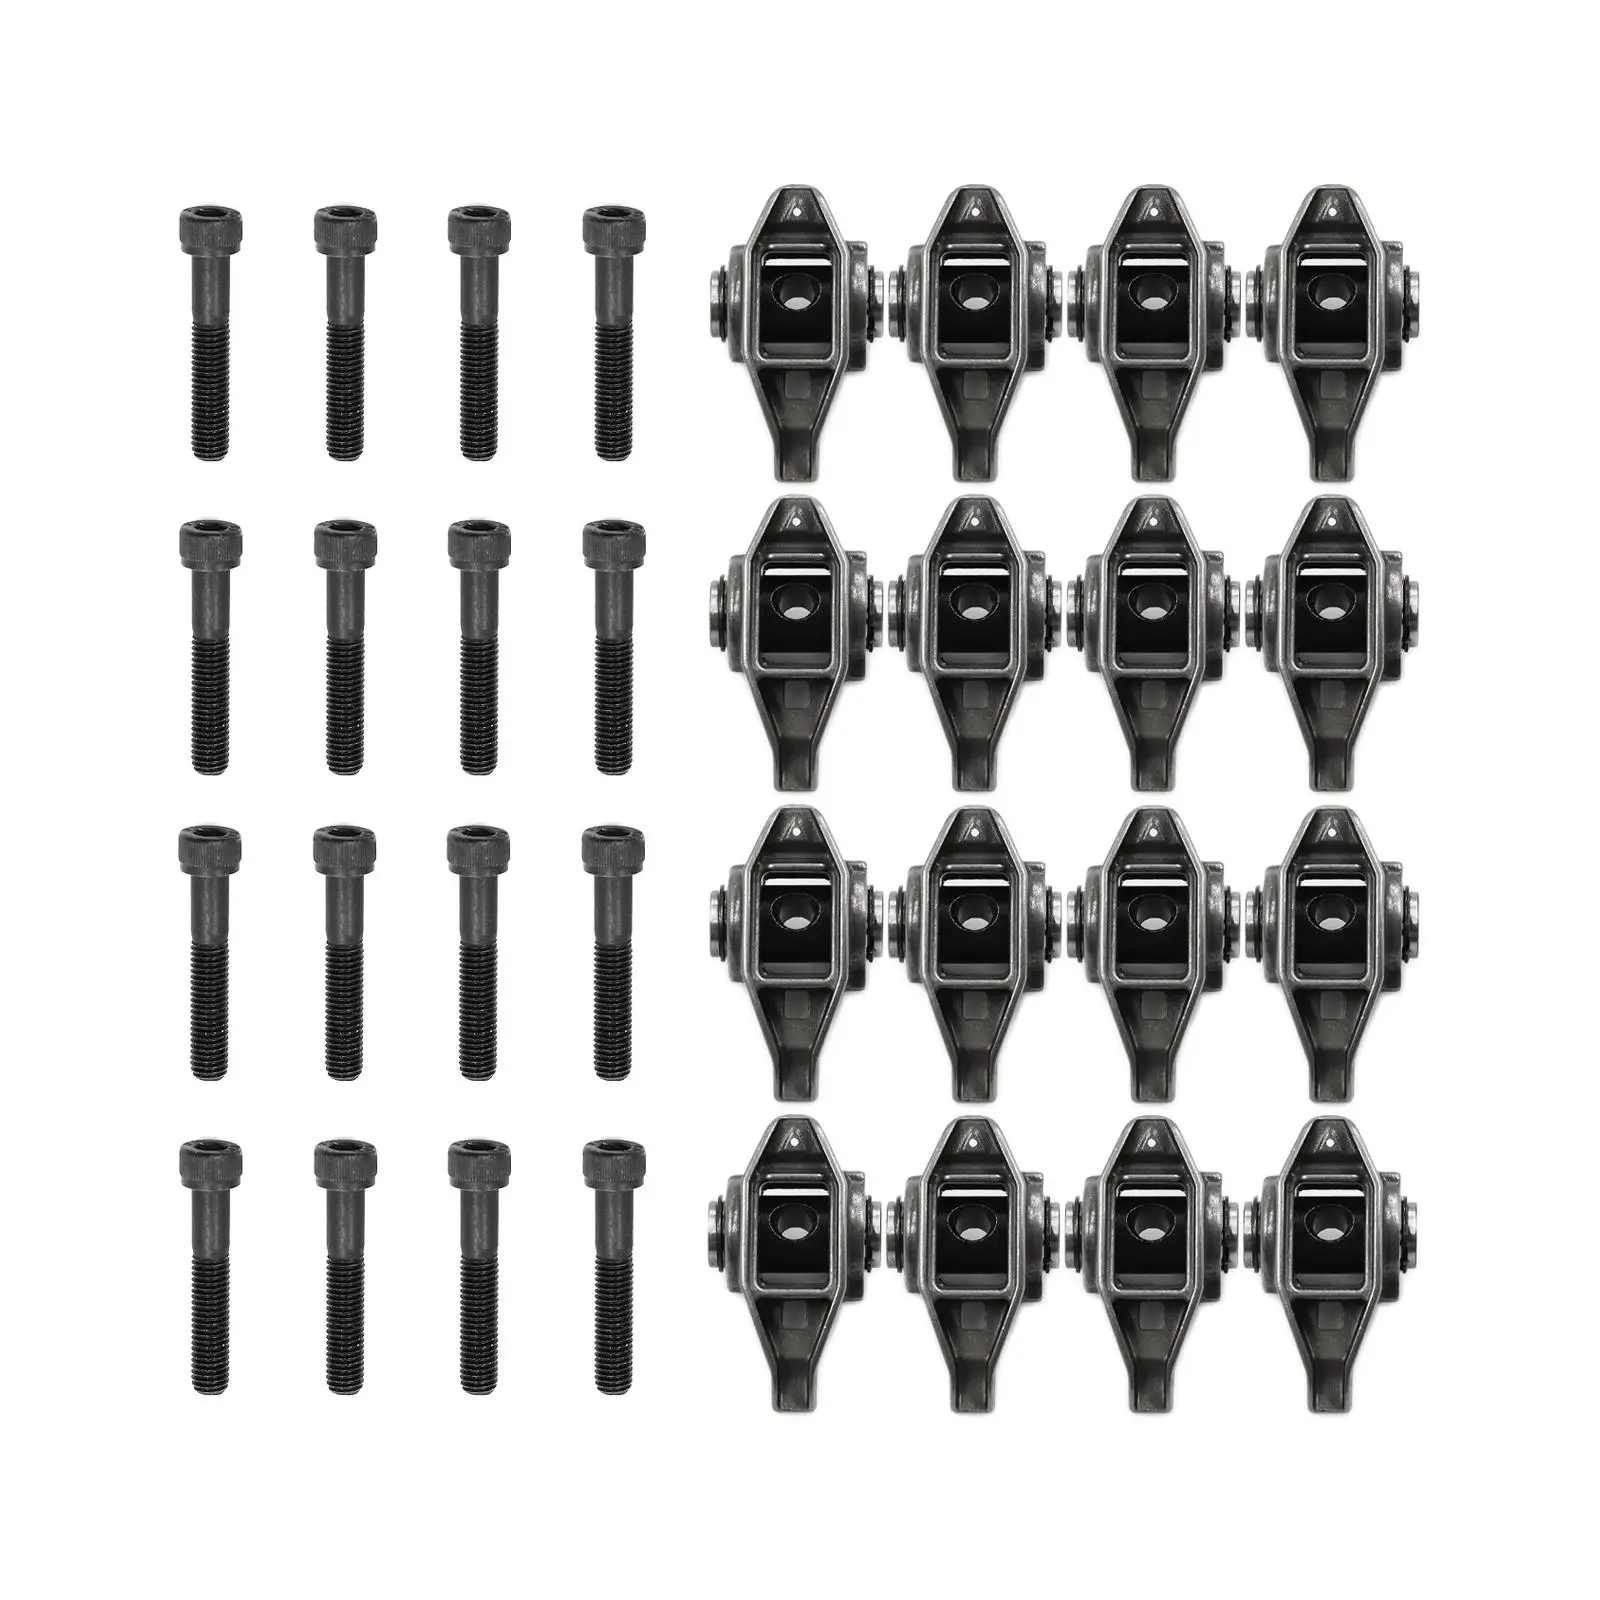 Rocker Arms and Bolts Lifter Replaces Shaft Professional Automobile Accessory Motorsports Engine Valve upgraded with set